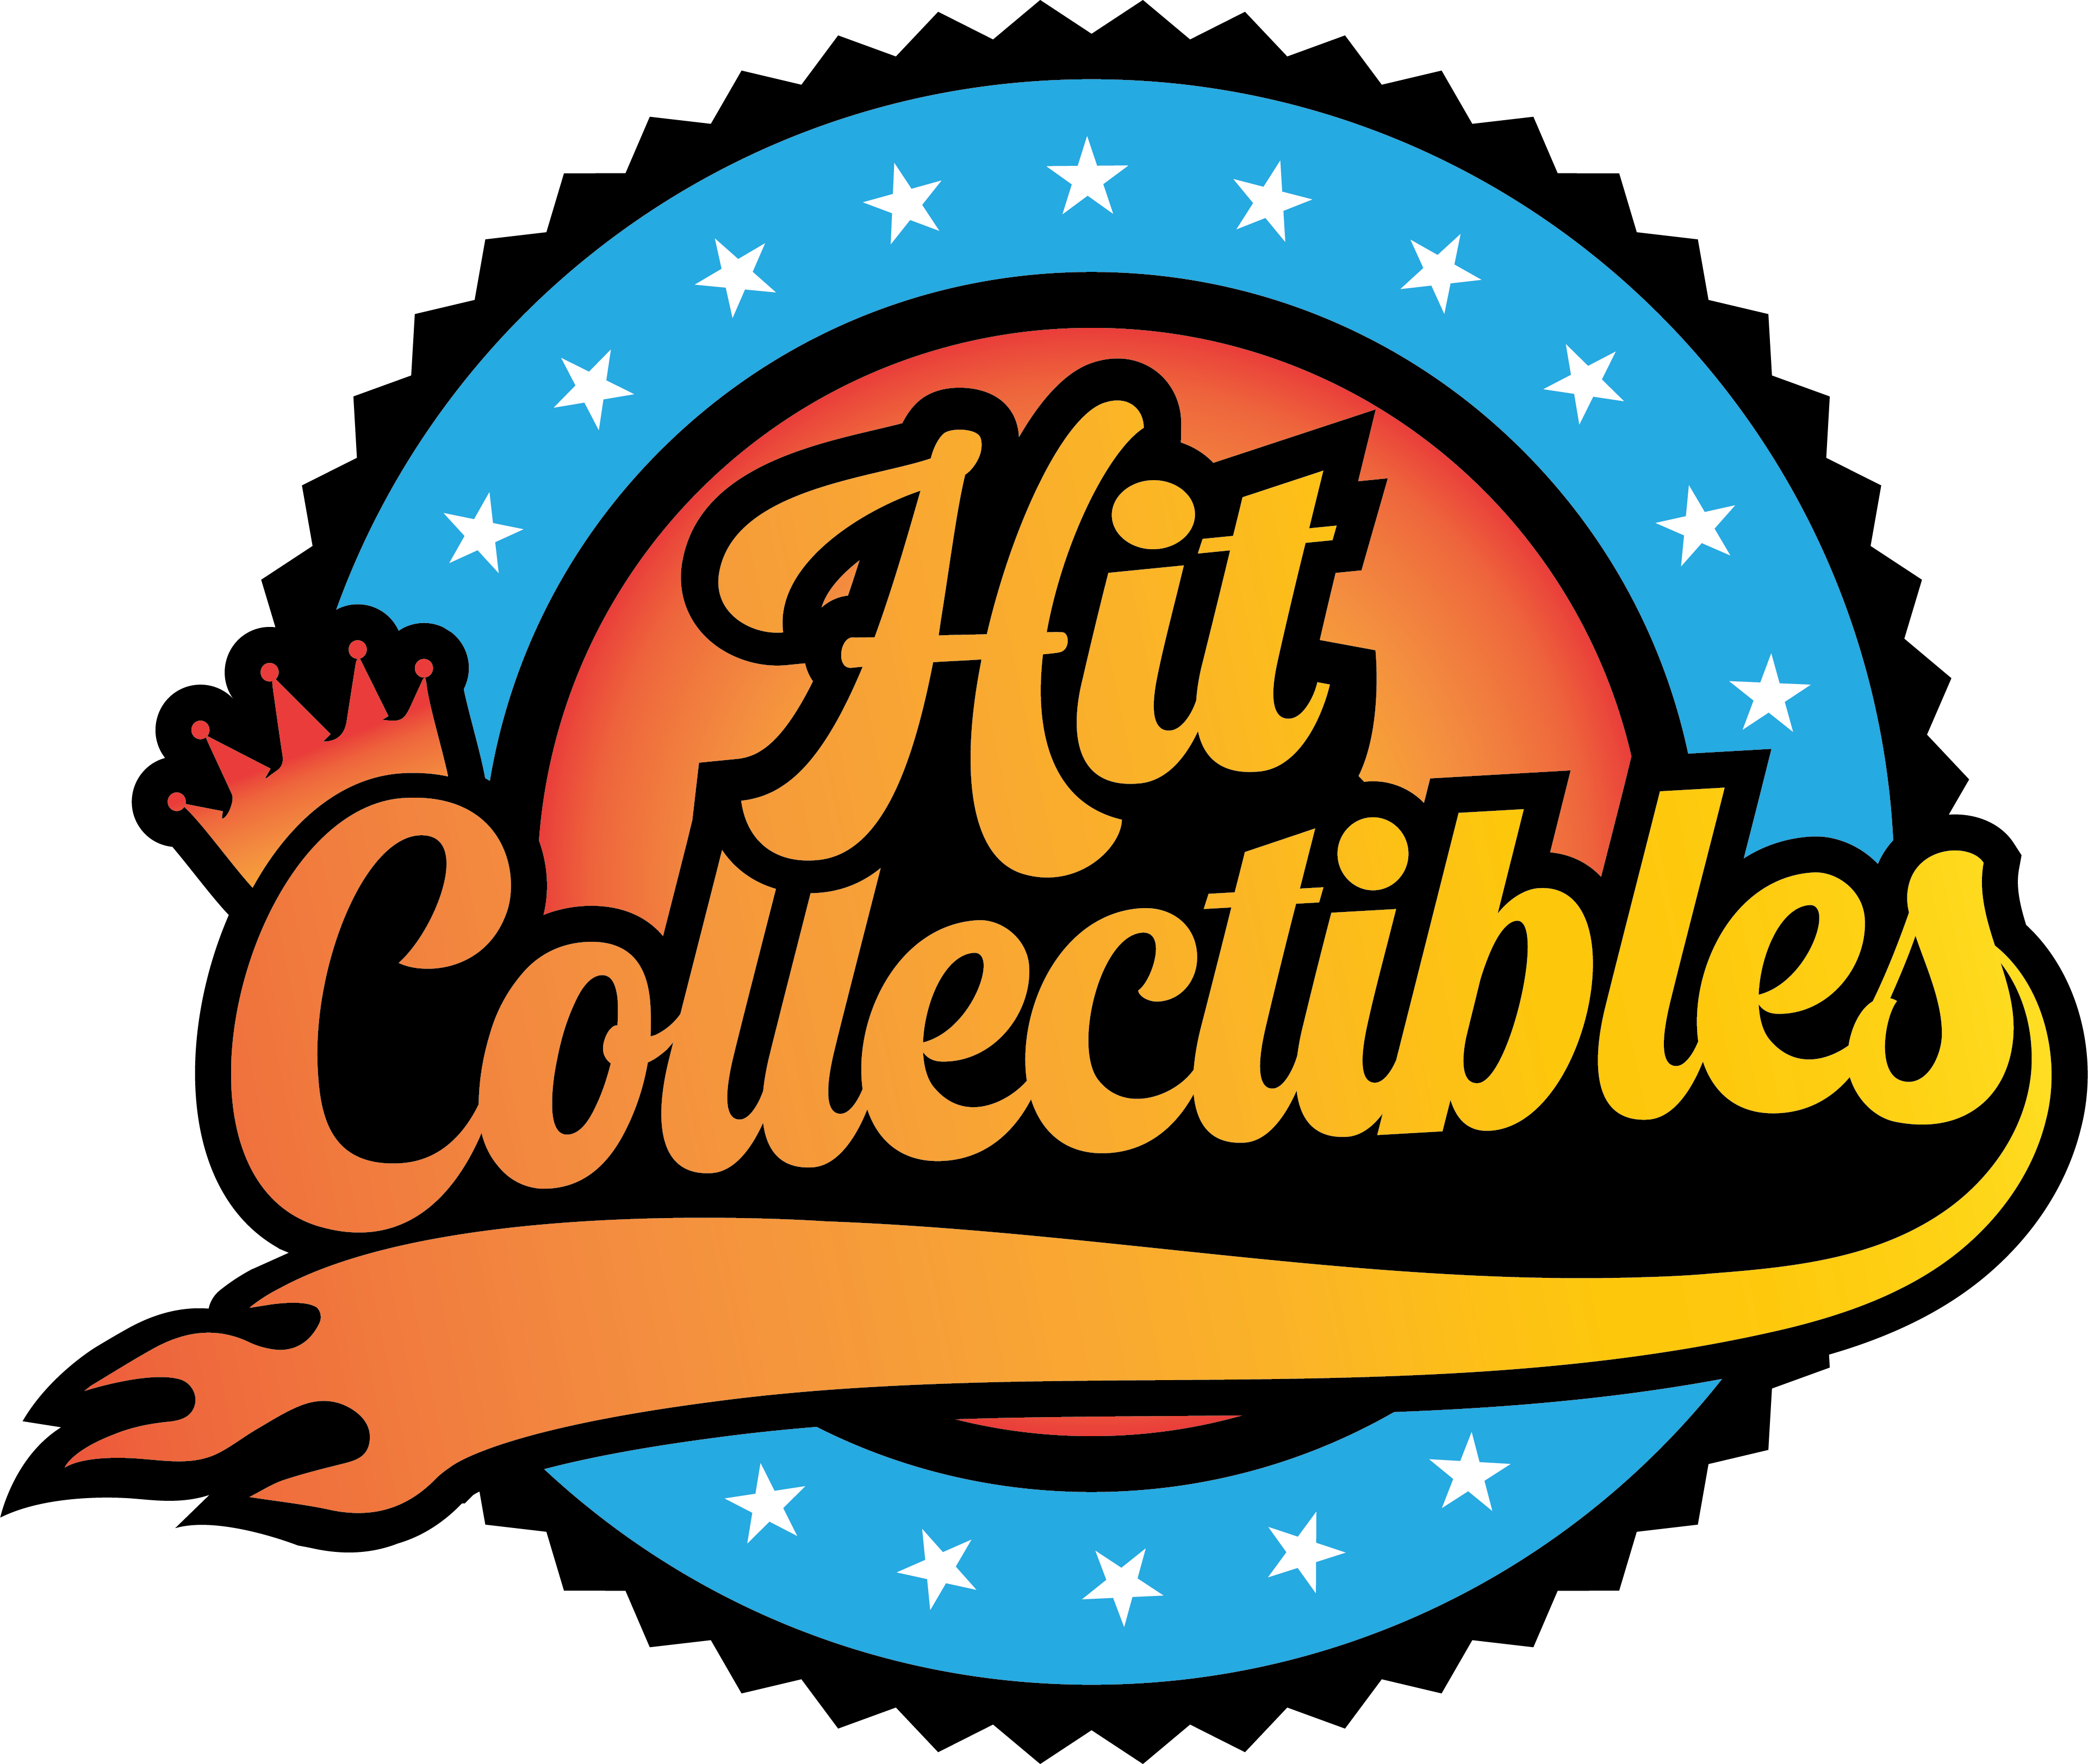 Hit Collectibles Logo, Hit over Collectibles with a crown on the C and Flame banner underlining Collectibles